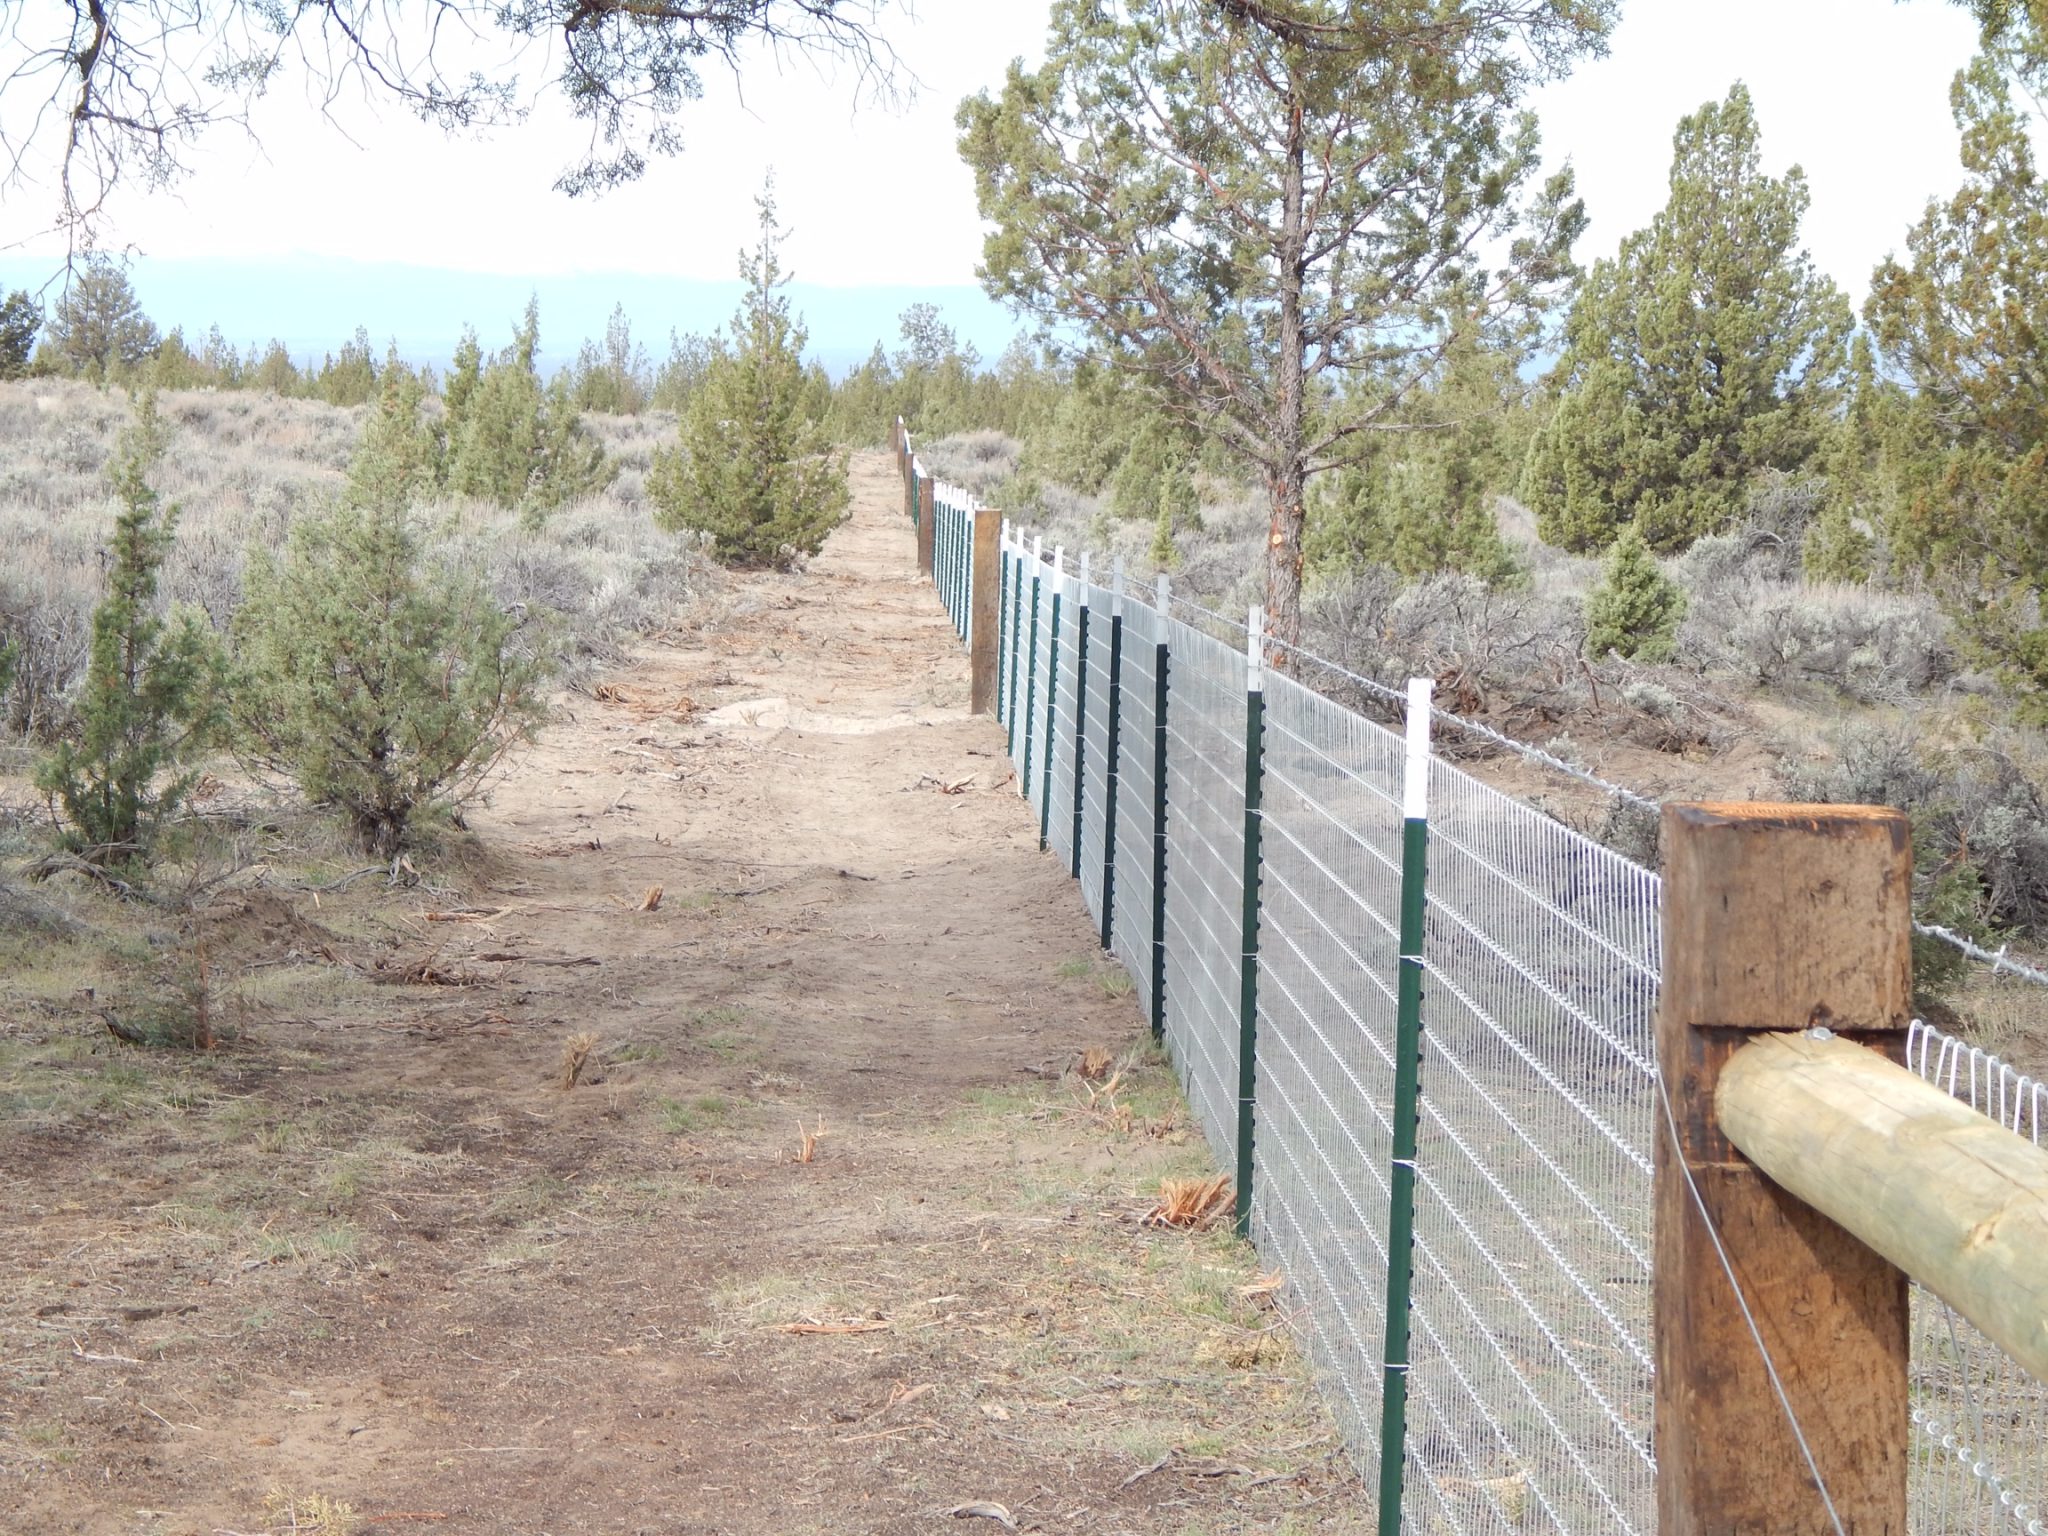 Support wire on your T Post fence. (Good Fence/Bad Fence)